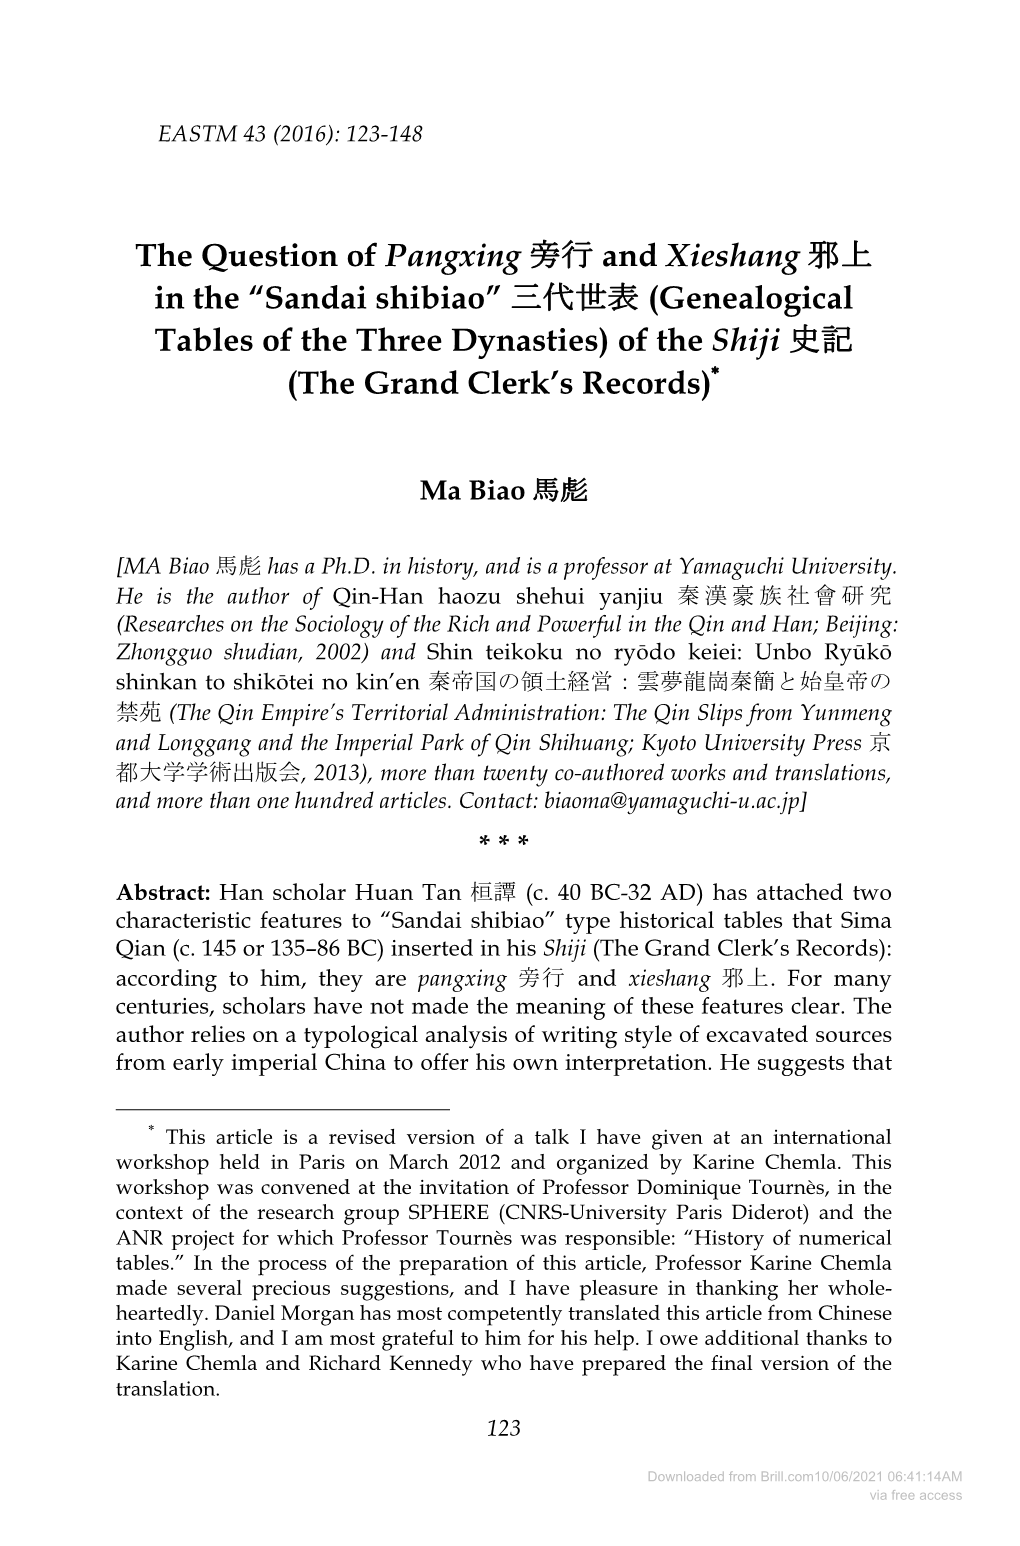 Sandai Shibiao” ���� (Genealogical Tables of the Three Dynasties) of the Shiji �� (The Grand Clerk’S Records)*